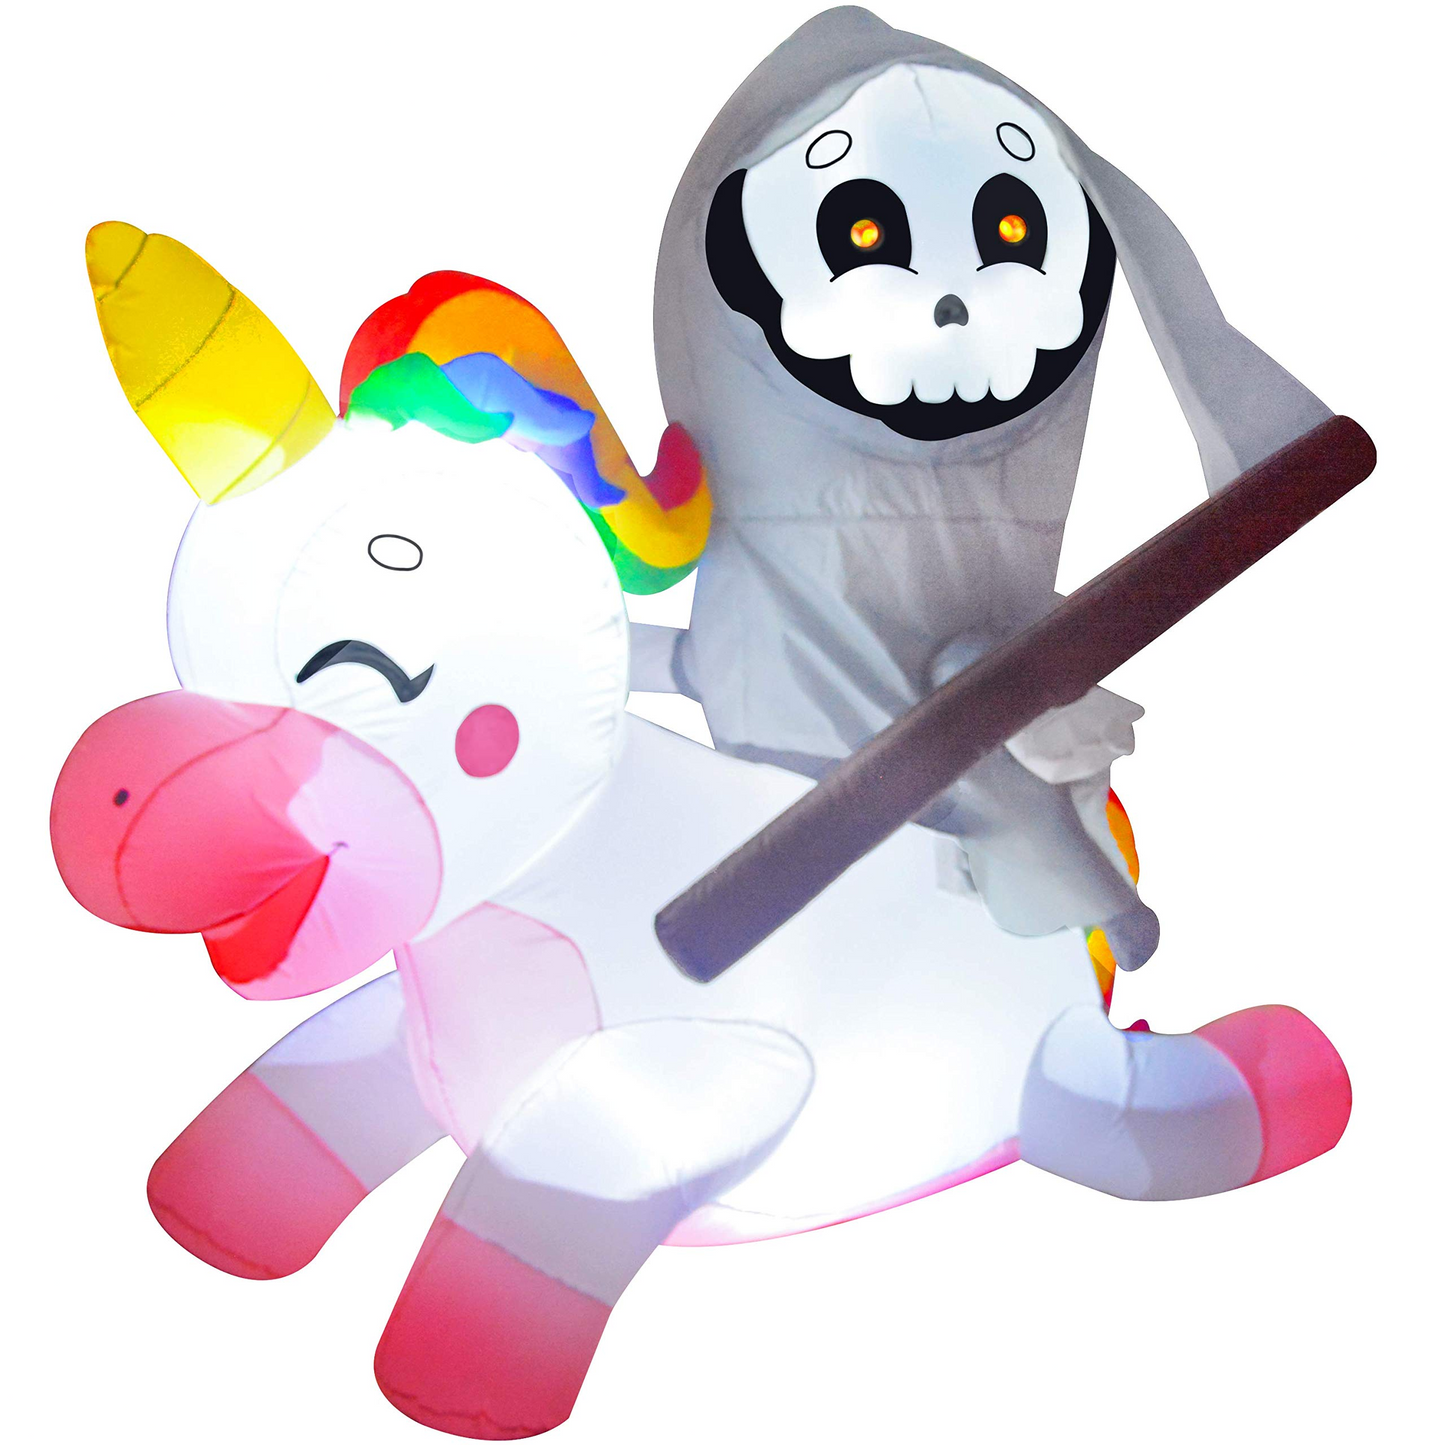 Halloween Tall Reaper Ride on inflatable ride a unicorn costume (5 ft)